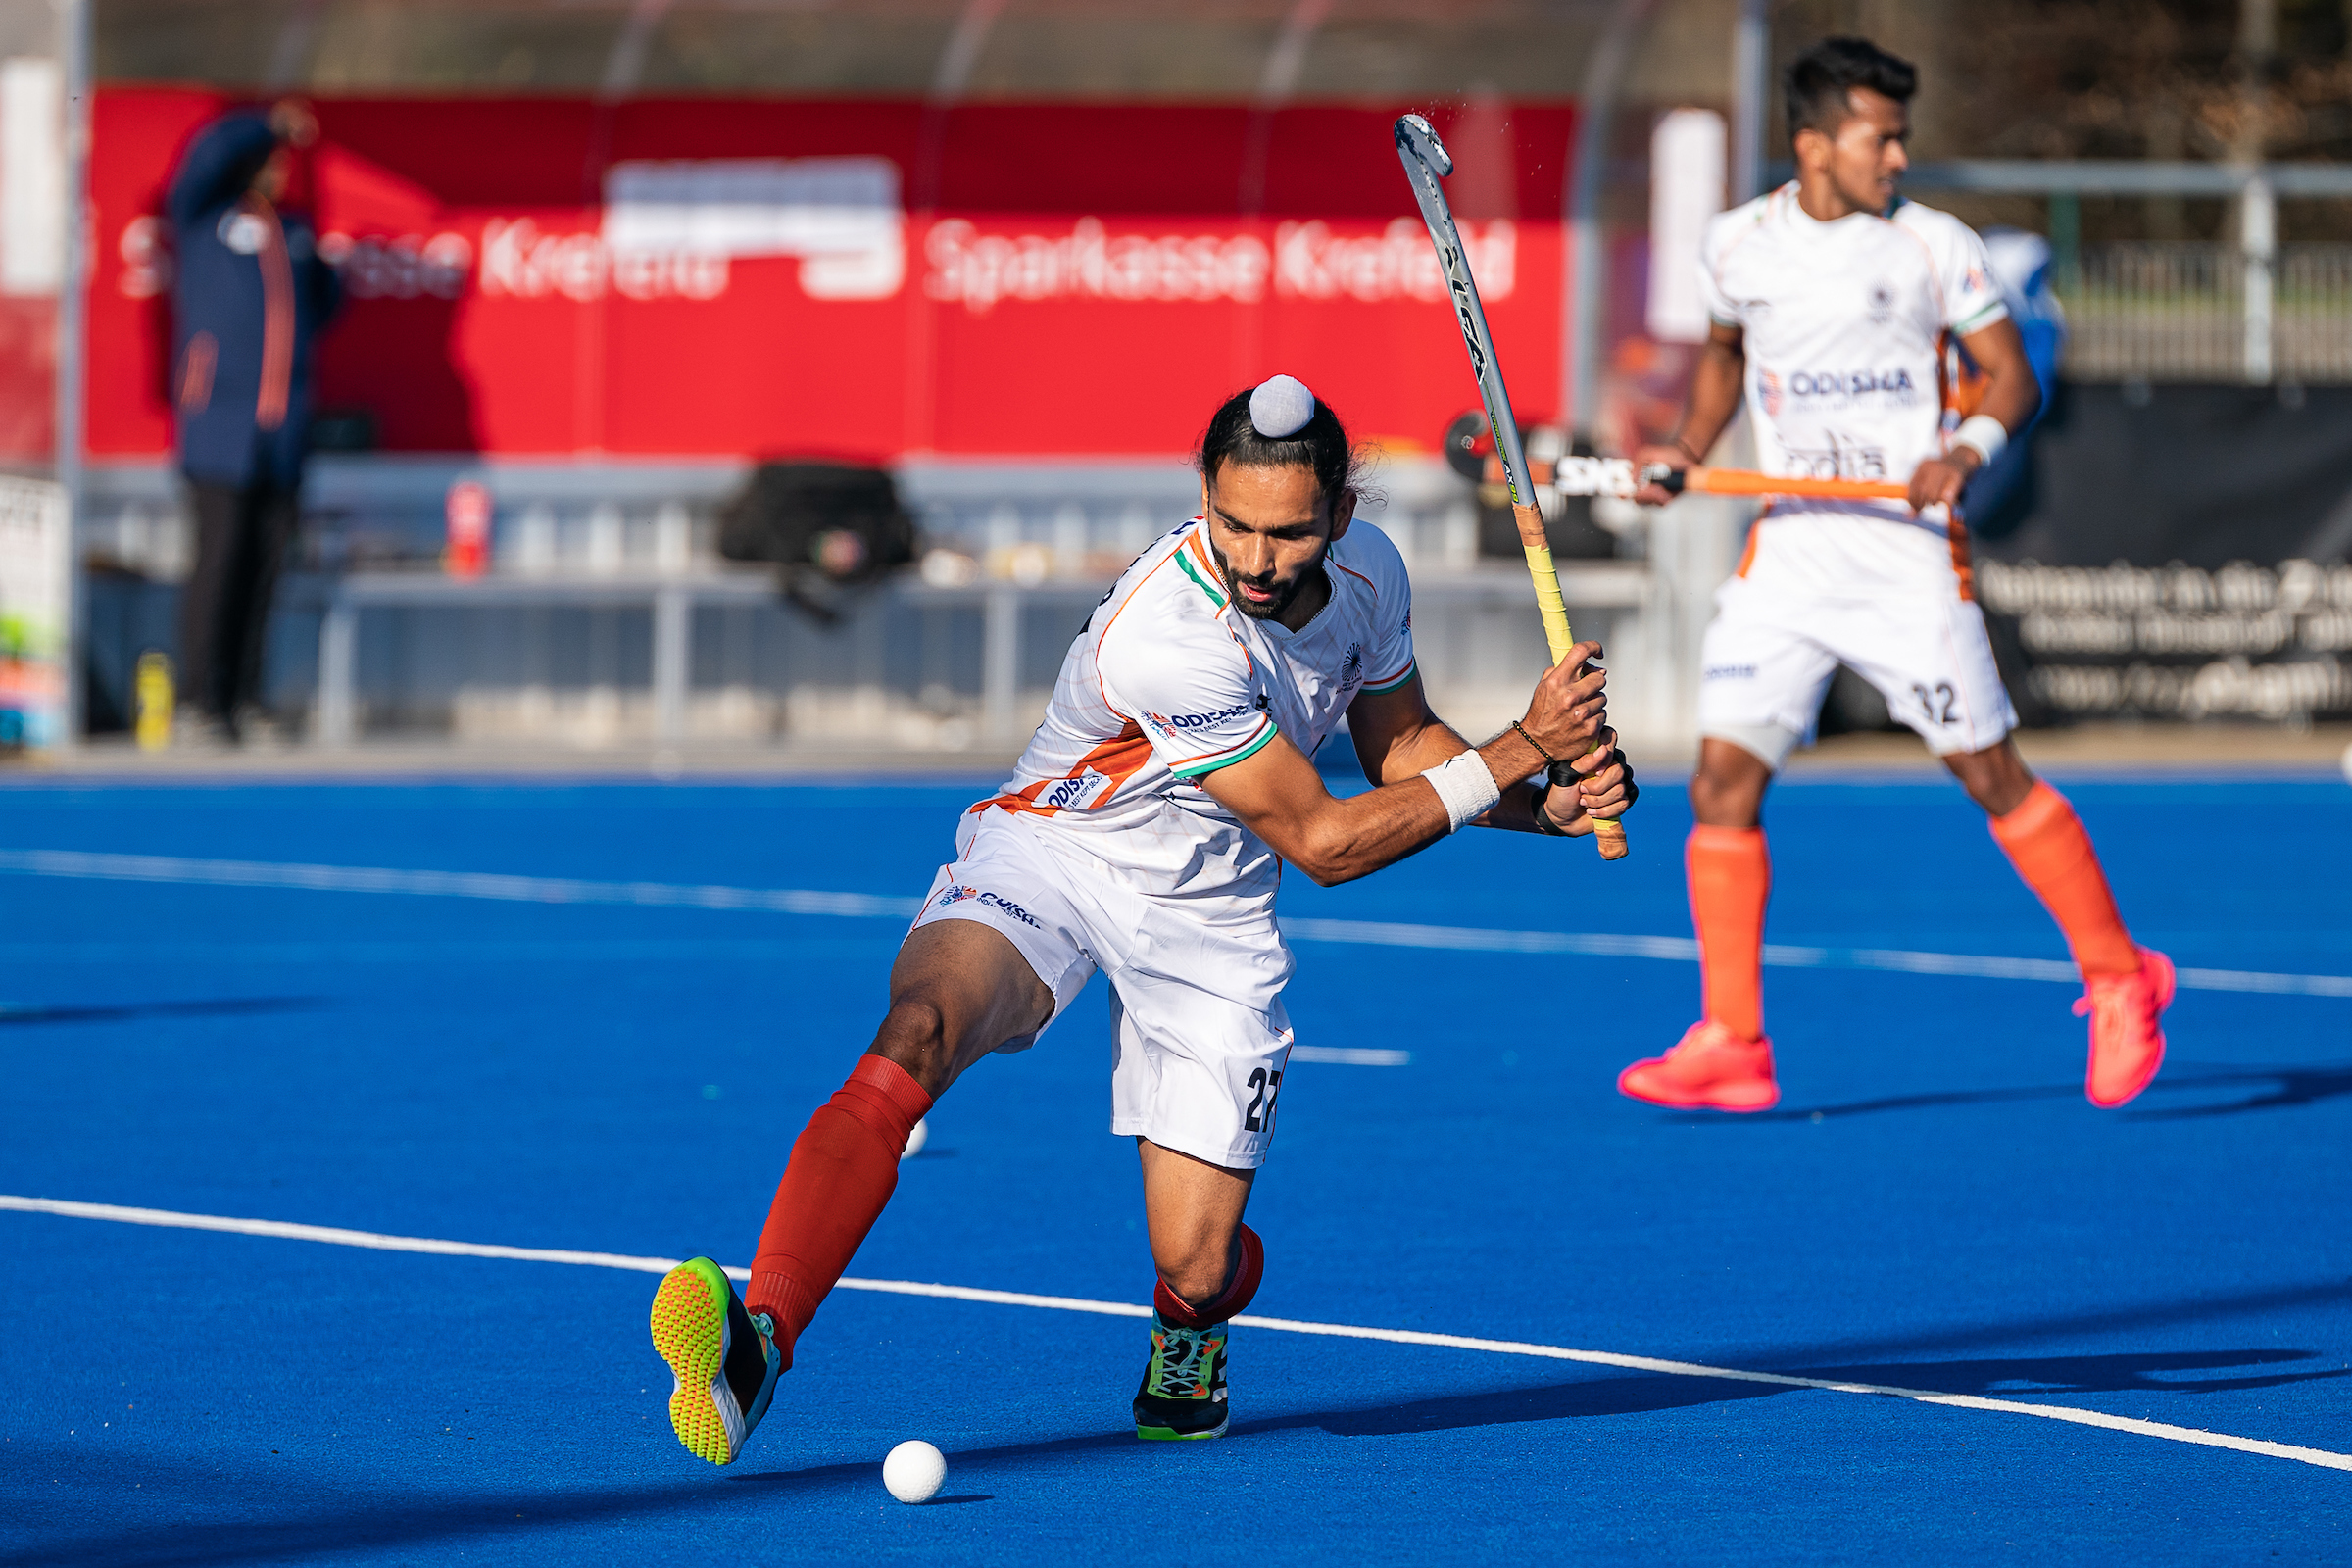 Exposure tours helped analyze our level against tough opponents, asserts Akashdeep Singh